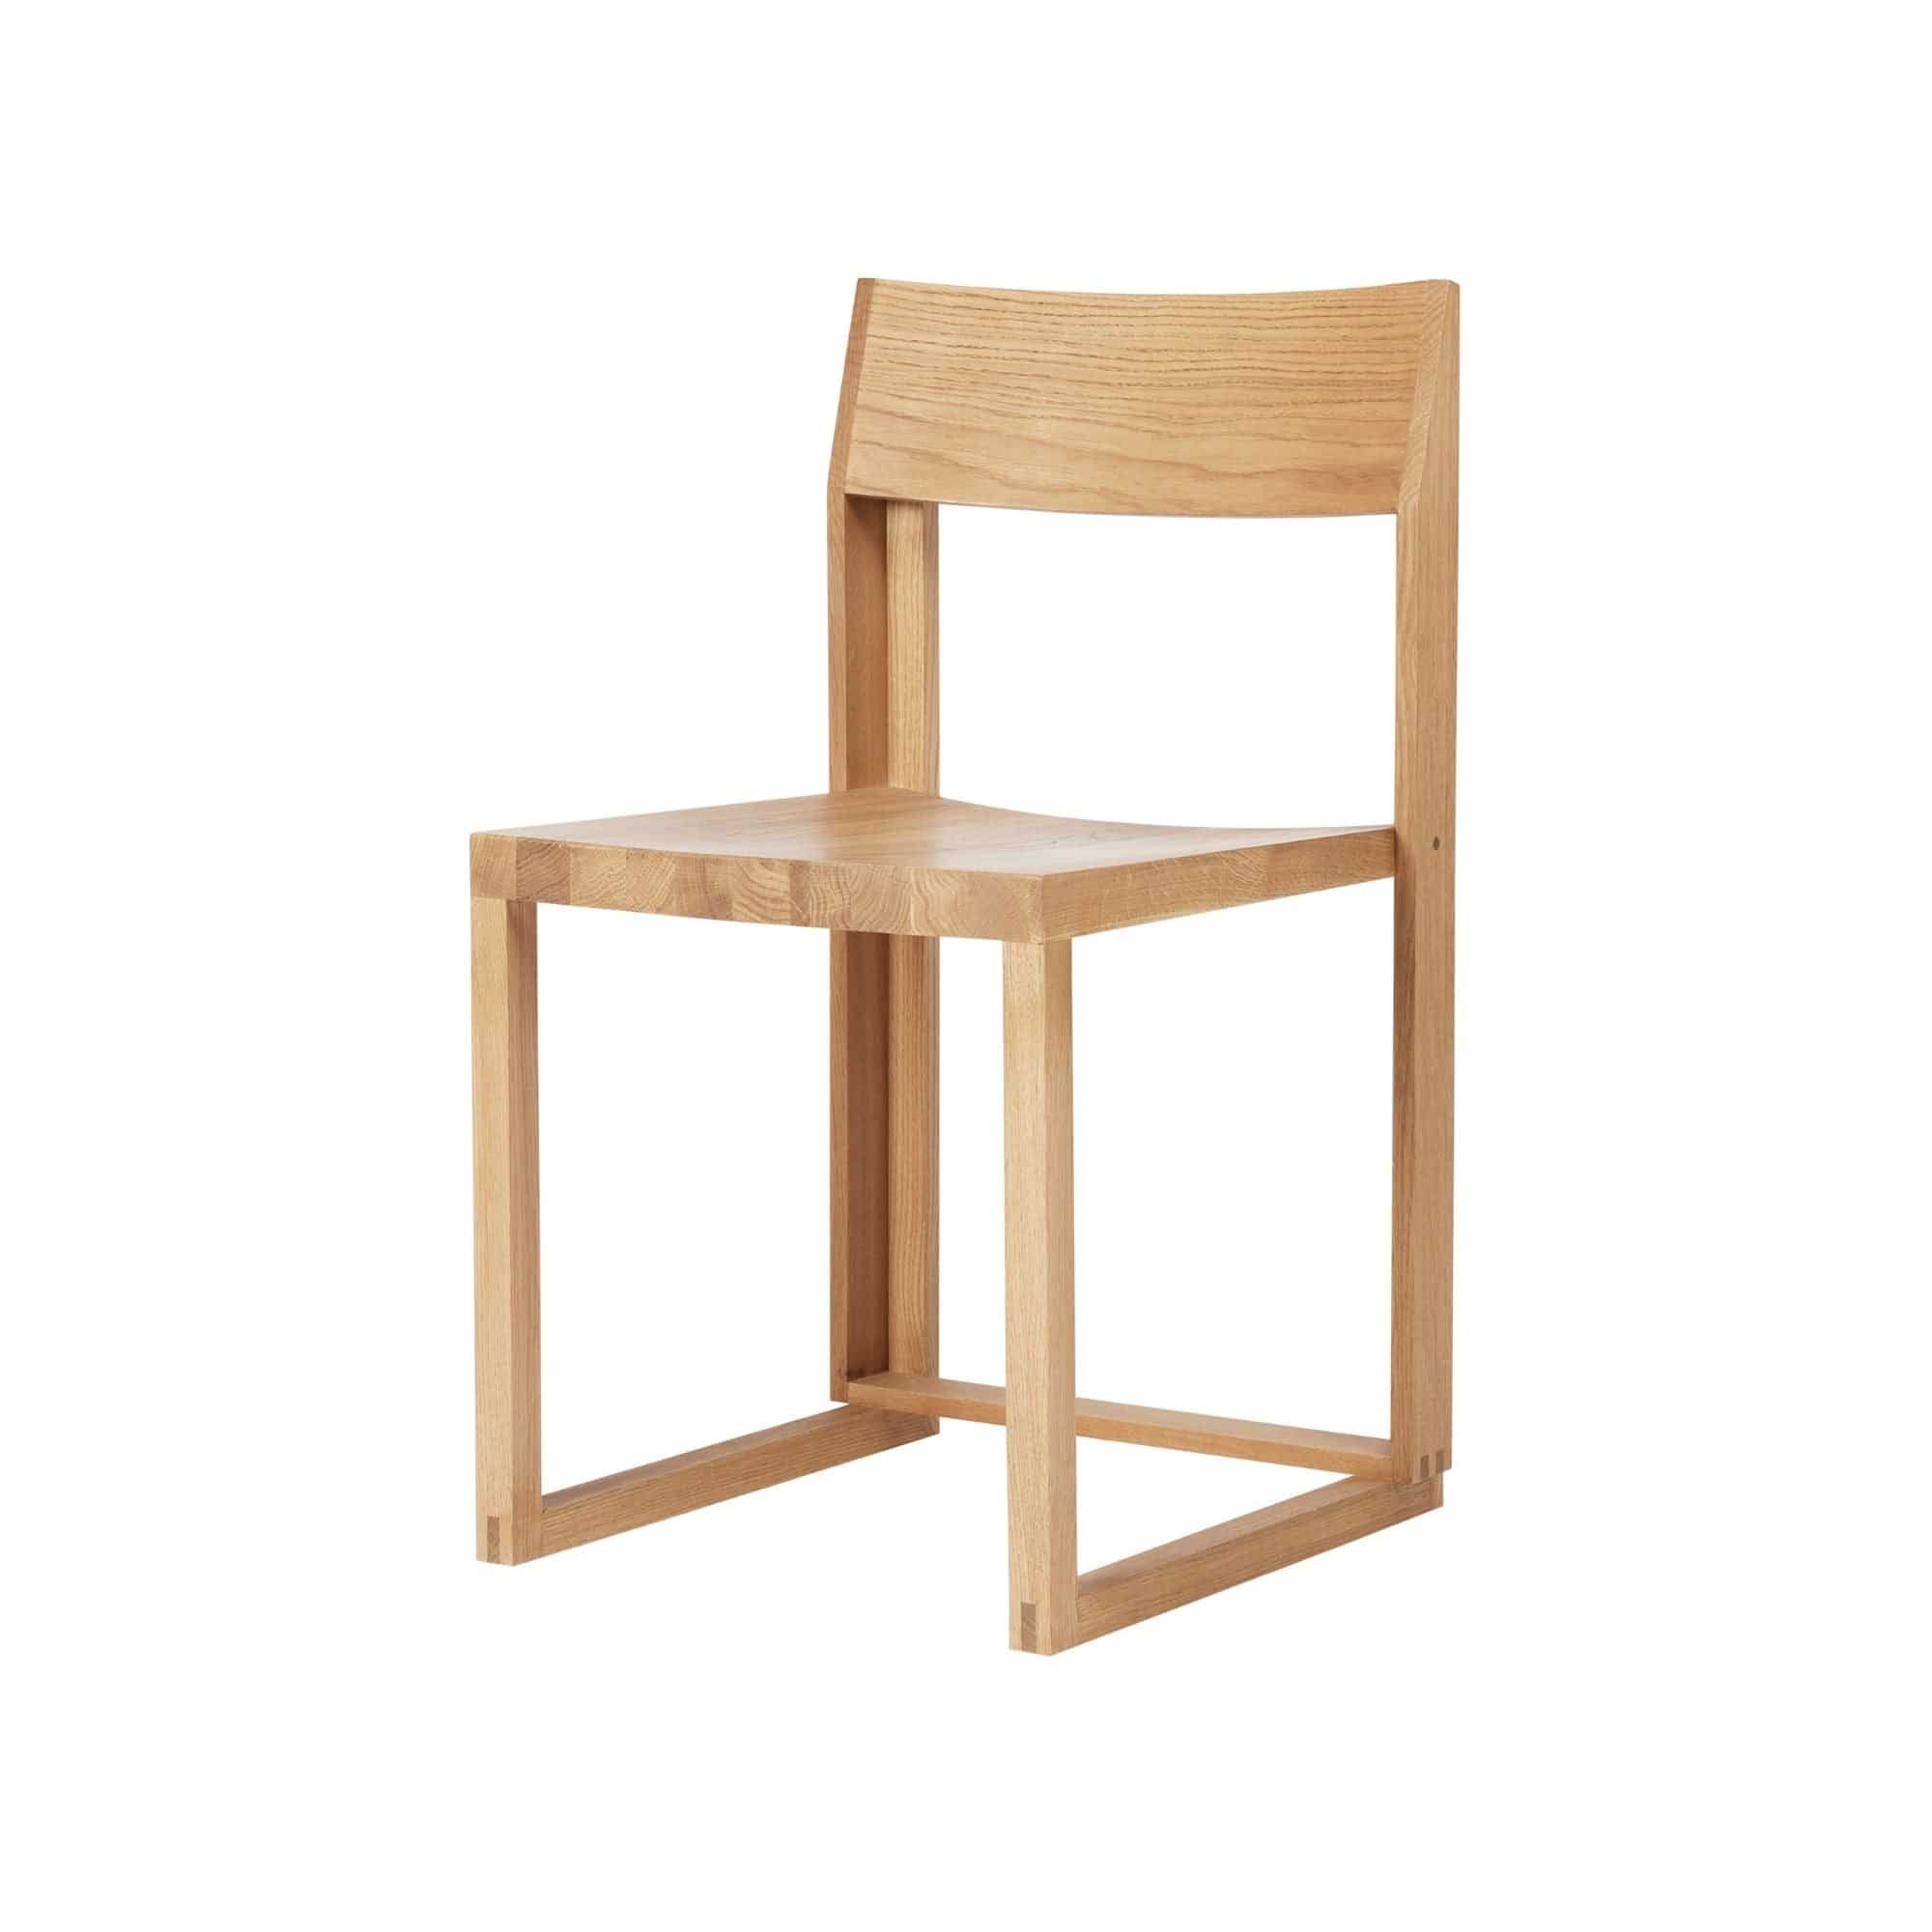 Outline Chair - THAT COOL LIVING